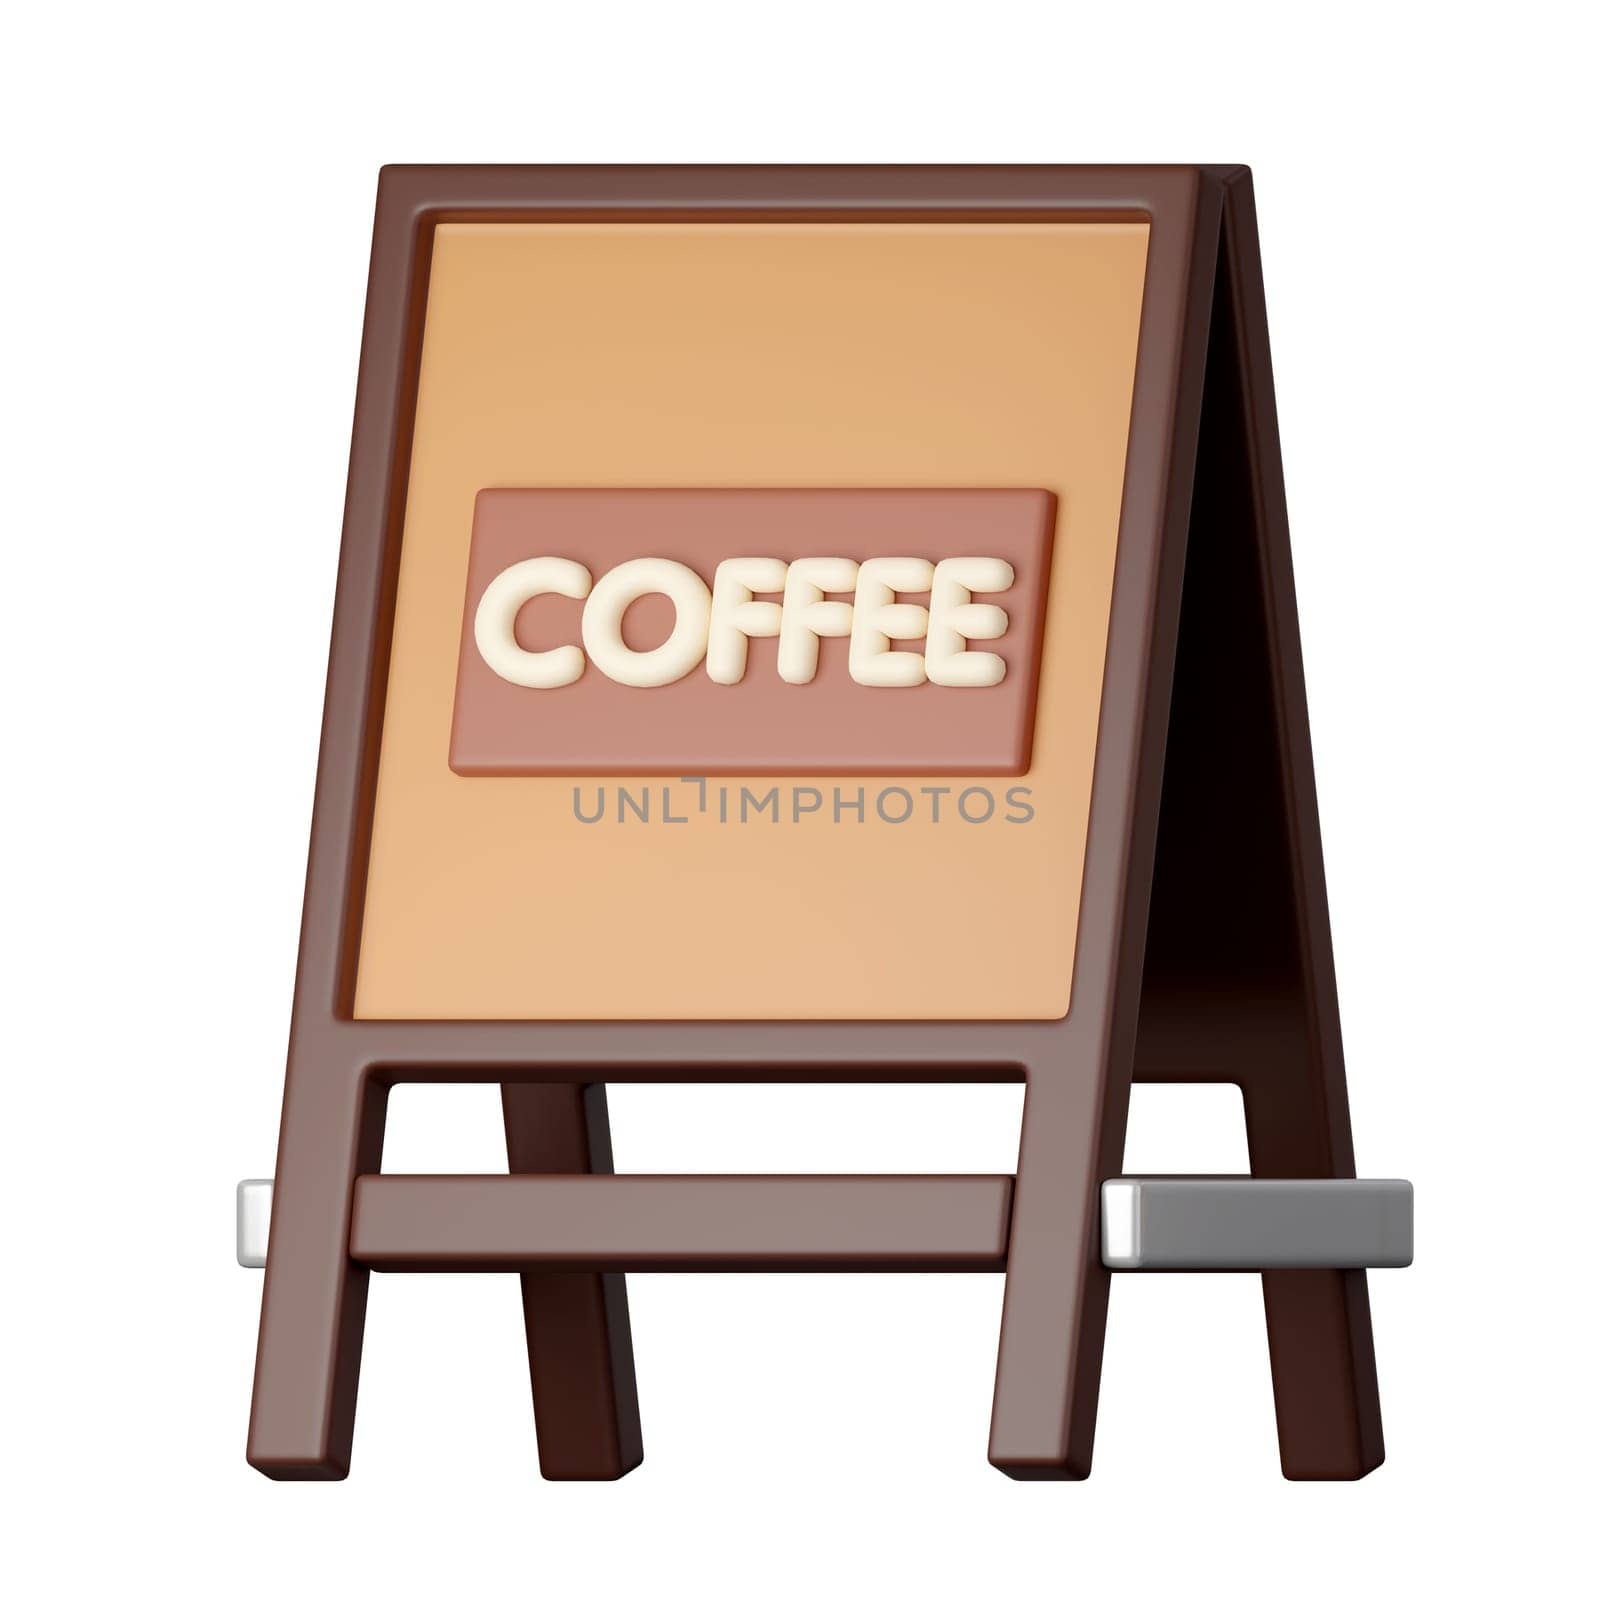 Coffee Shop Board Coffee sign outside 3d illustration.